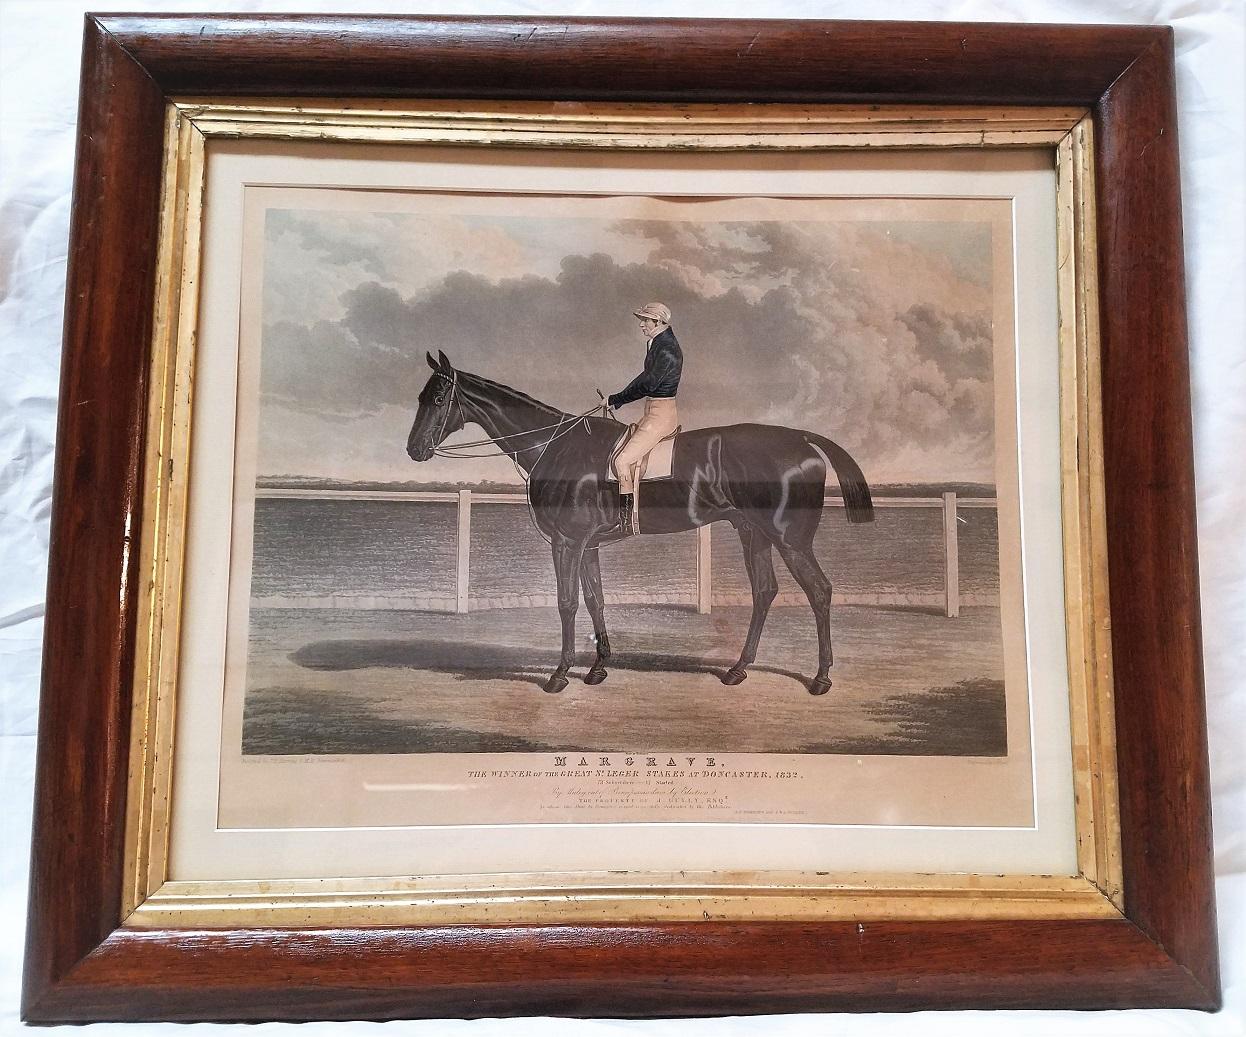 Hand-Painted Early 19th Century Aquatint Engraving of Margrave by John Frederick Herring Snr